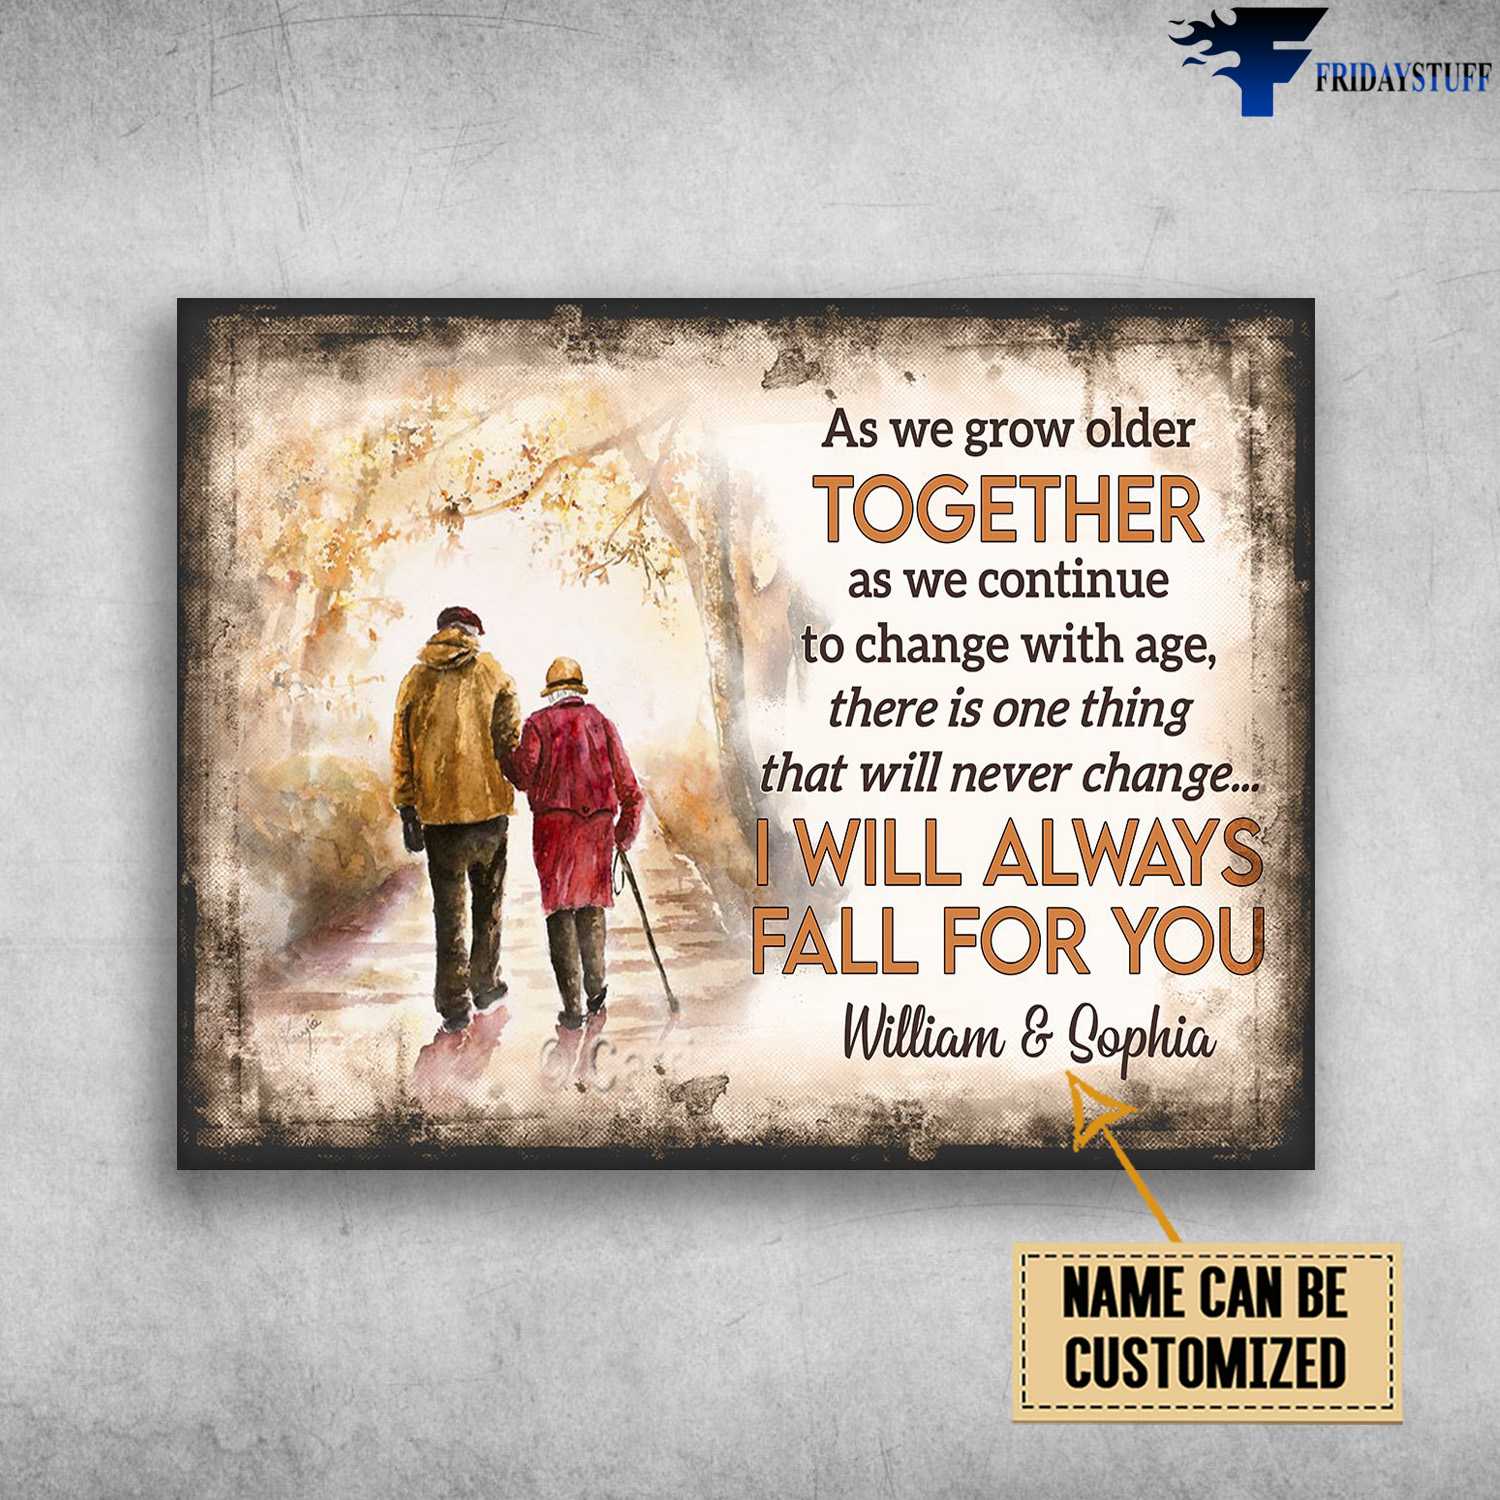 Couple Poster, Beaustiful Love, As We Grow Older Together, As We Continue To Change With Age, There Is One Thing, That Will Never Chang, I Will Always Fall For You